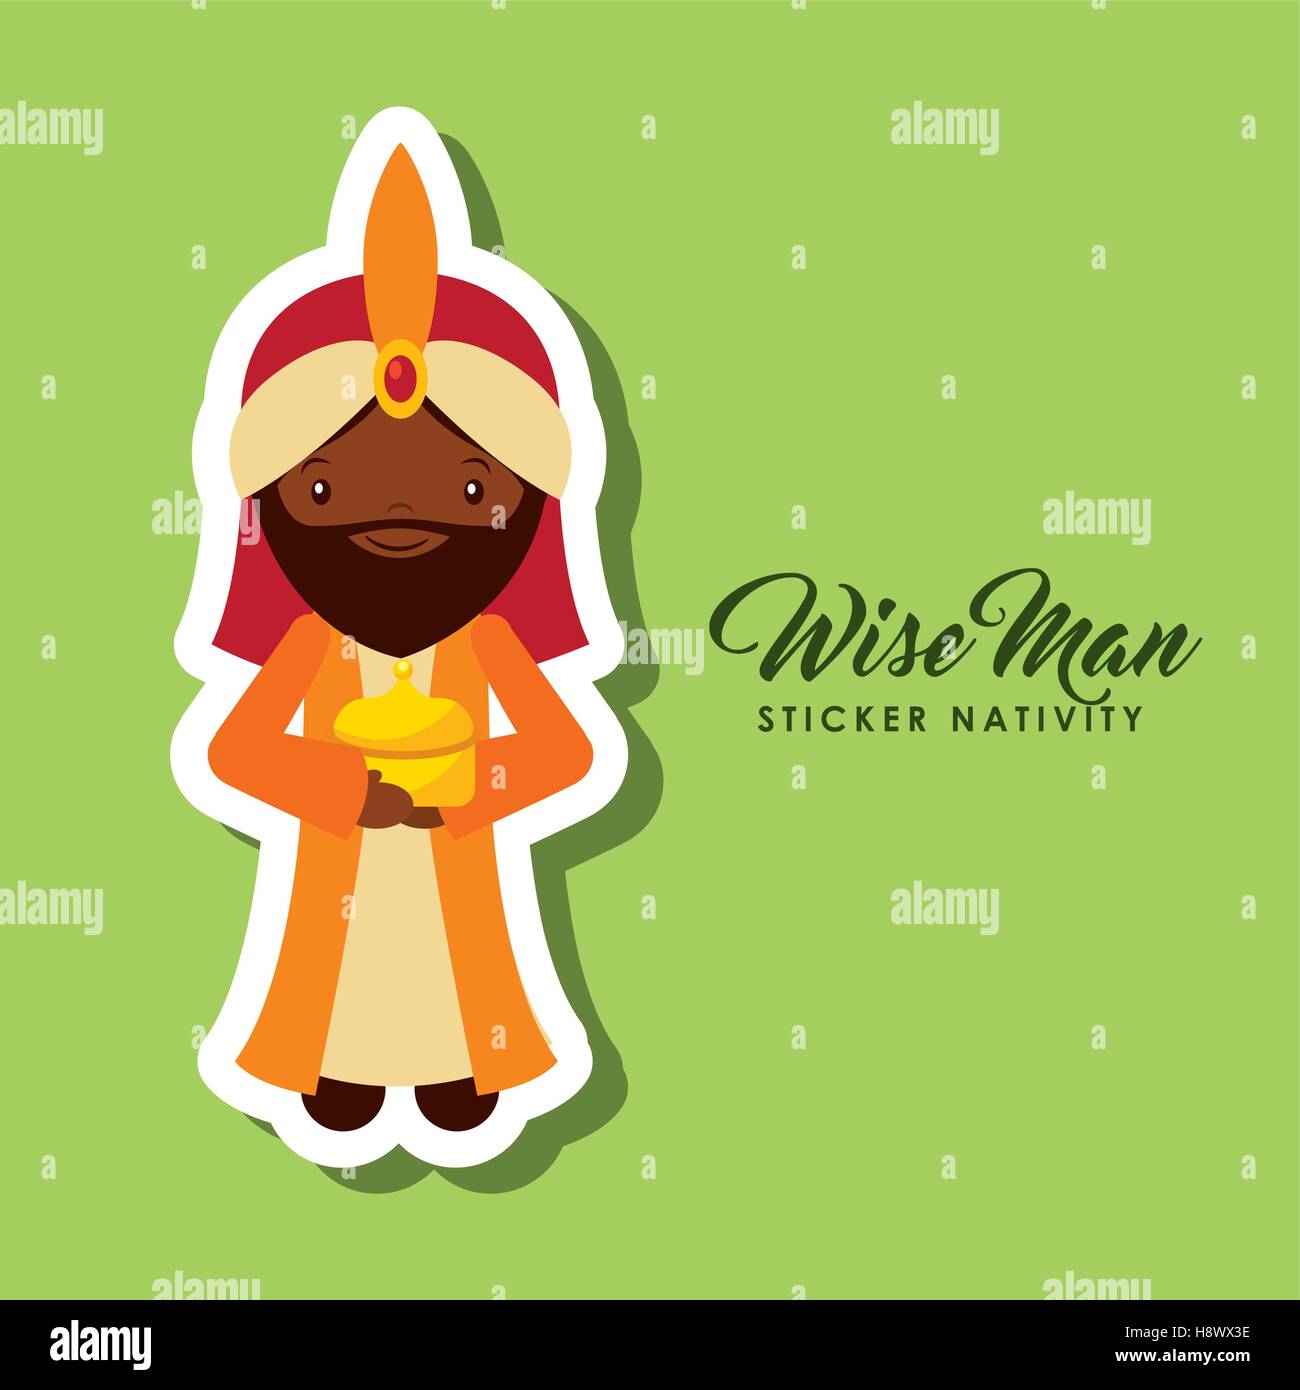 cartoon wise man sticker nativity over green background. colorful design. vector illustration Stock Vector